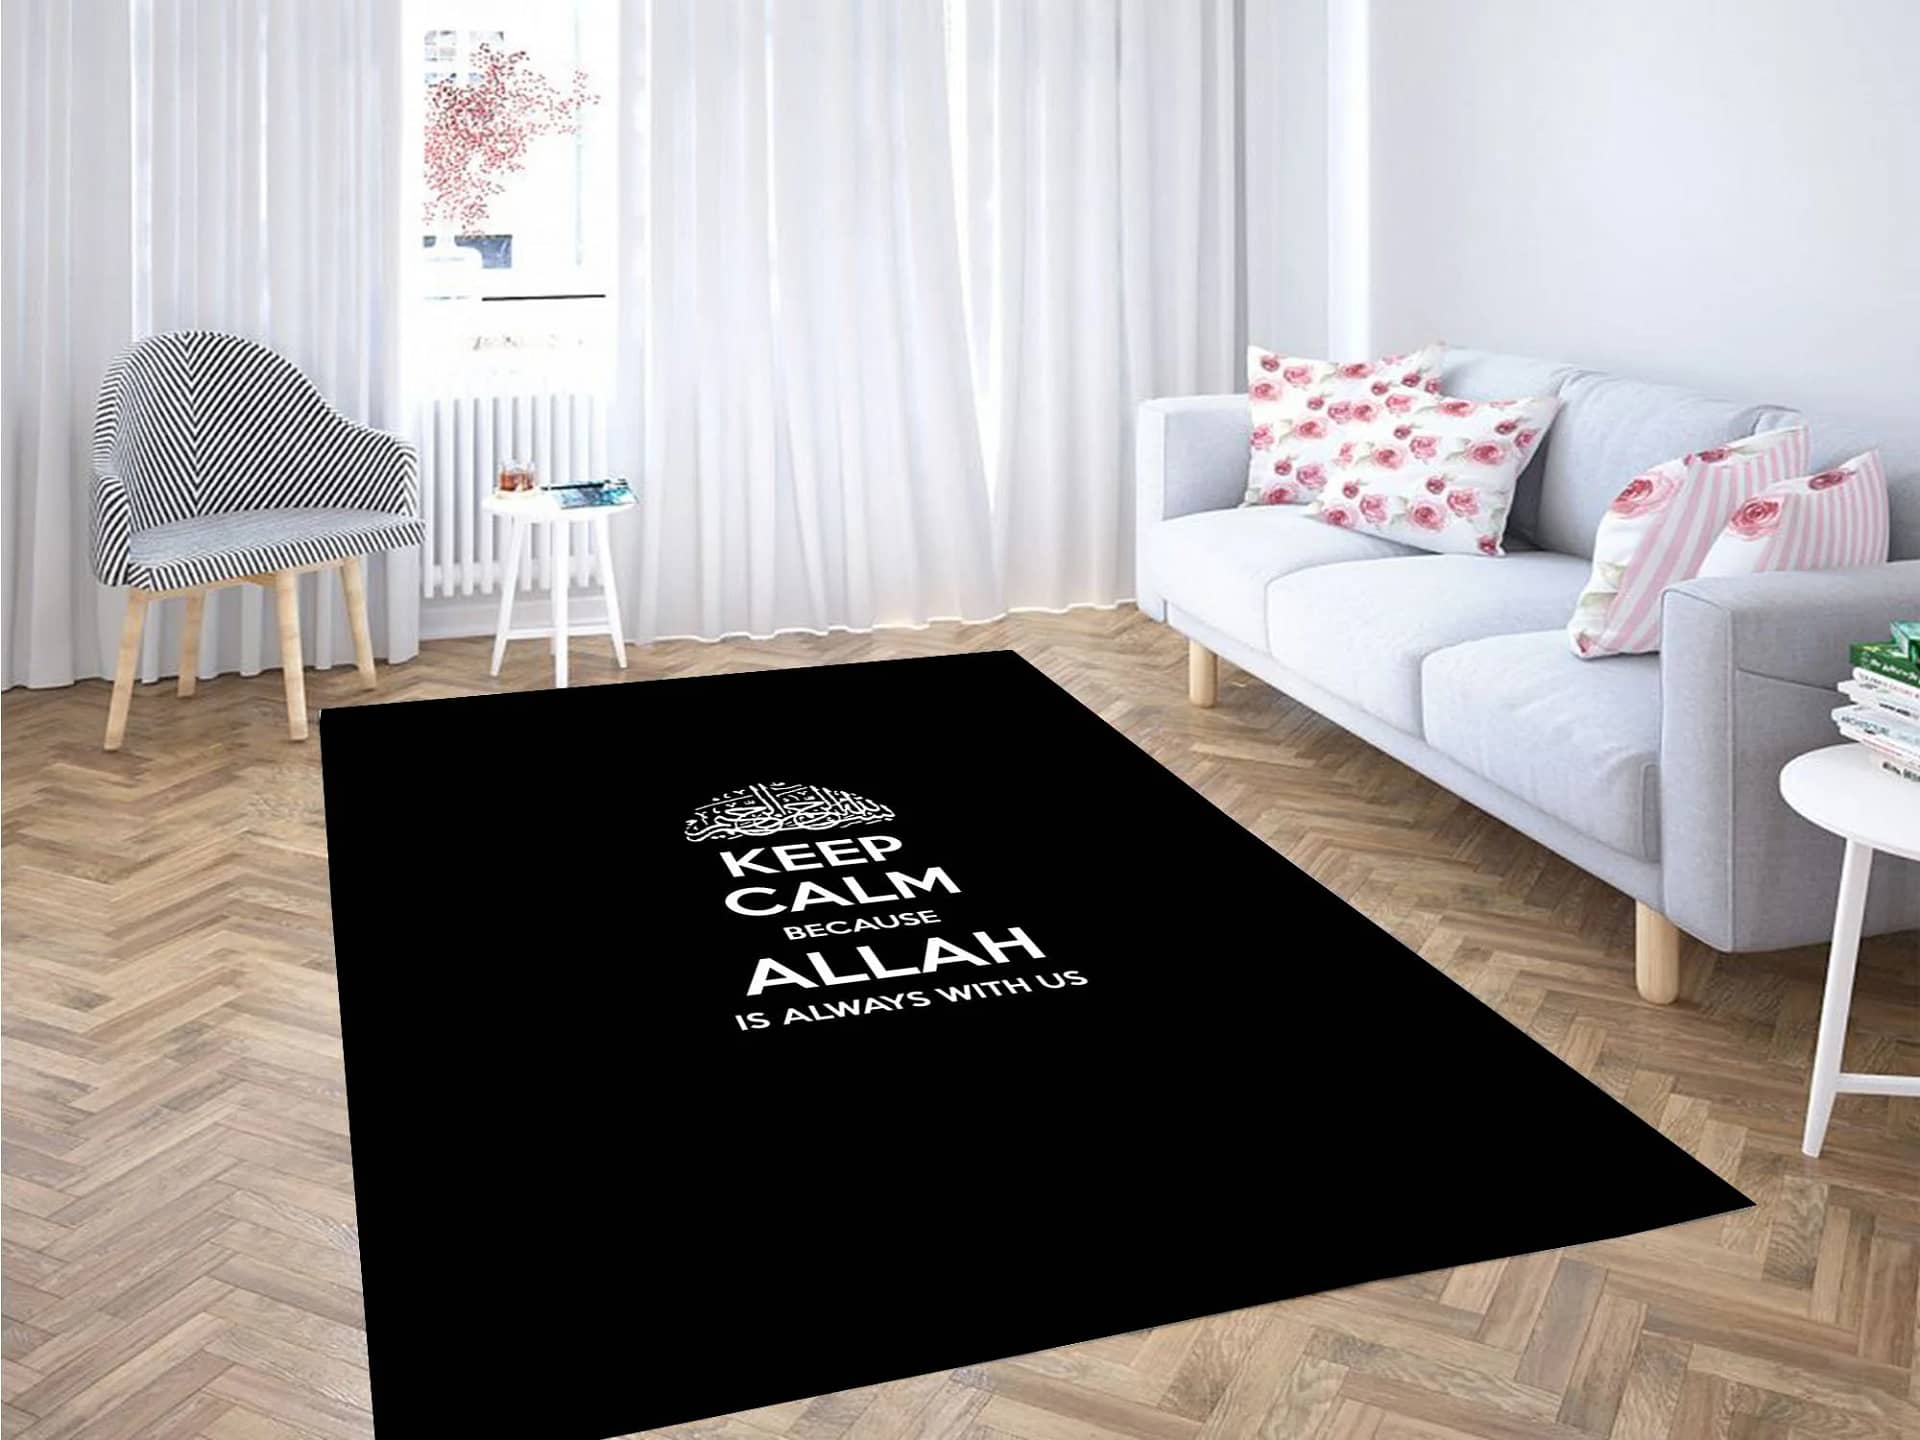 Keep Calm Because Allah Is Always Ith Us Carpet Rug